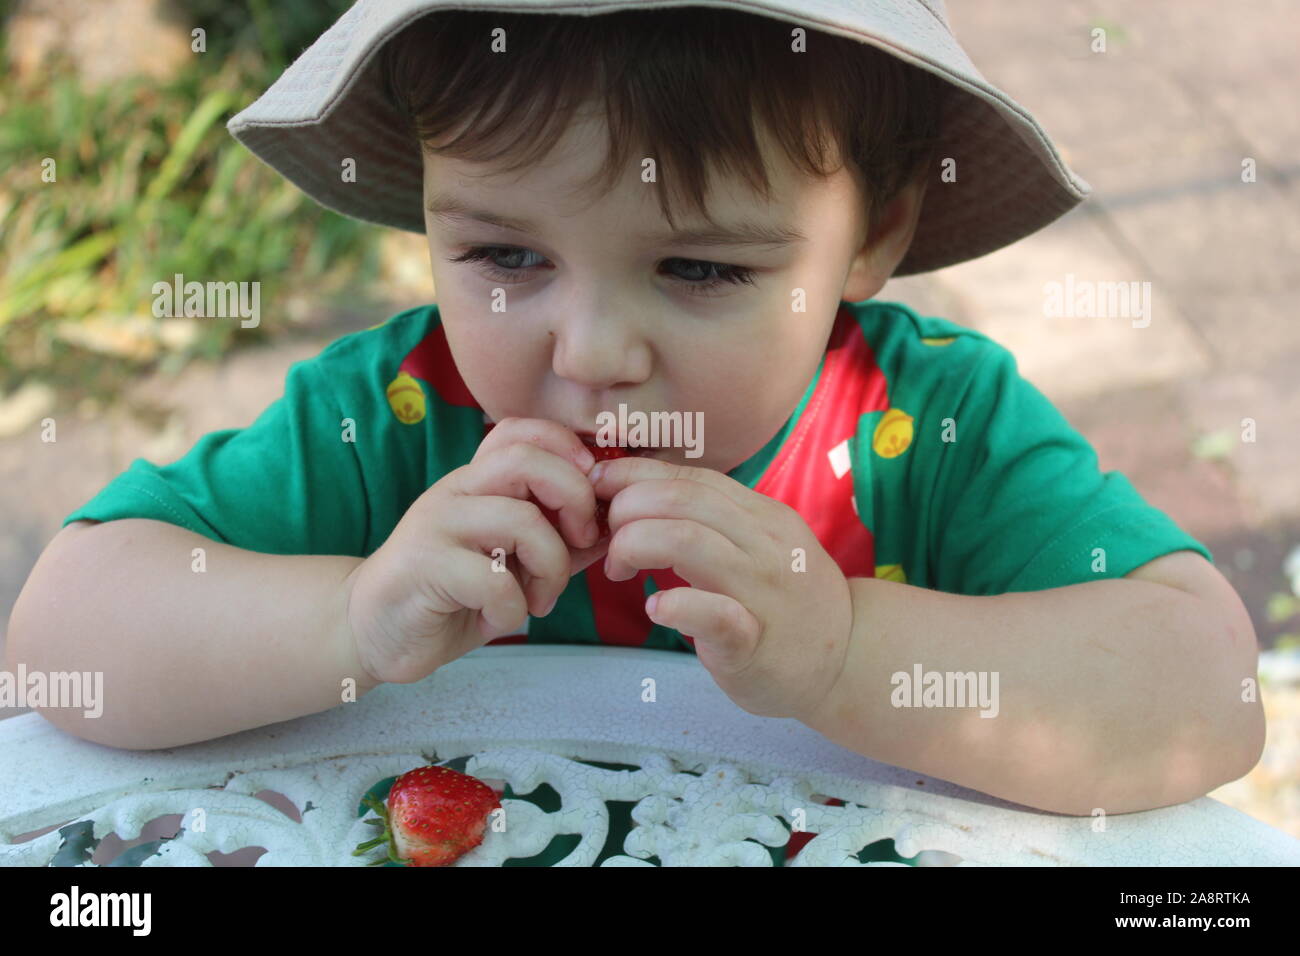 A young toddler eating strawberries like a good boy Stock Photo